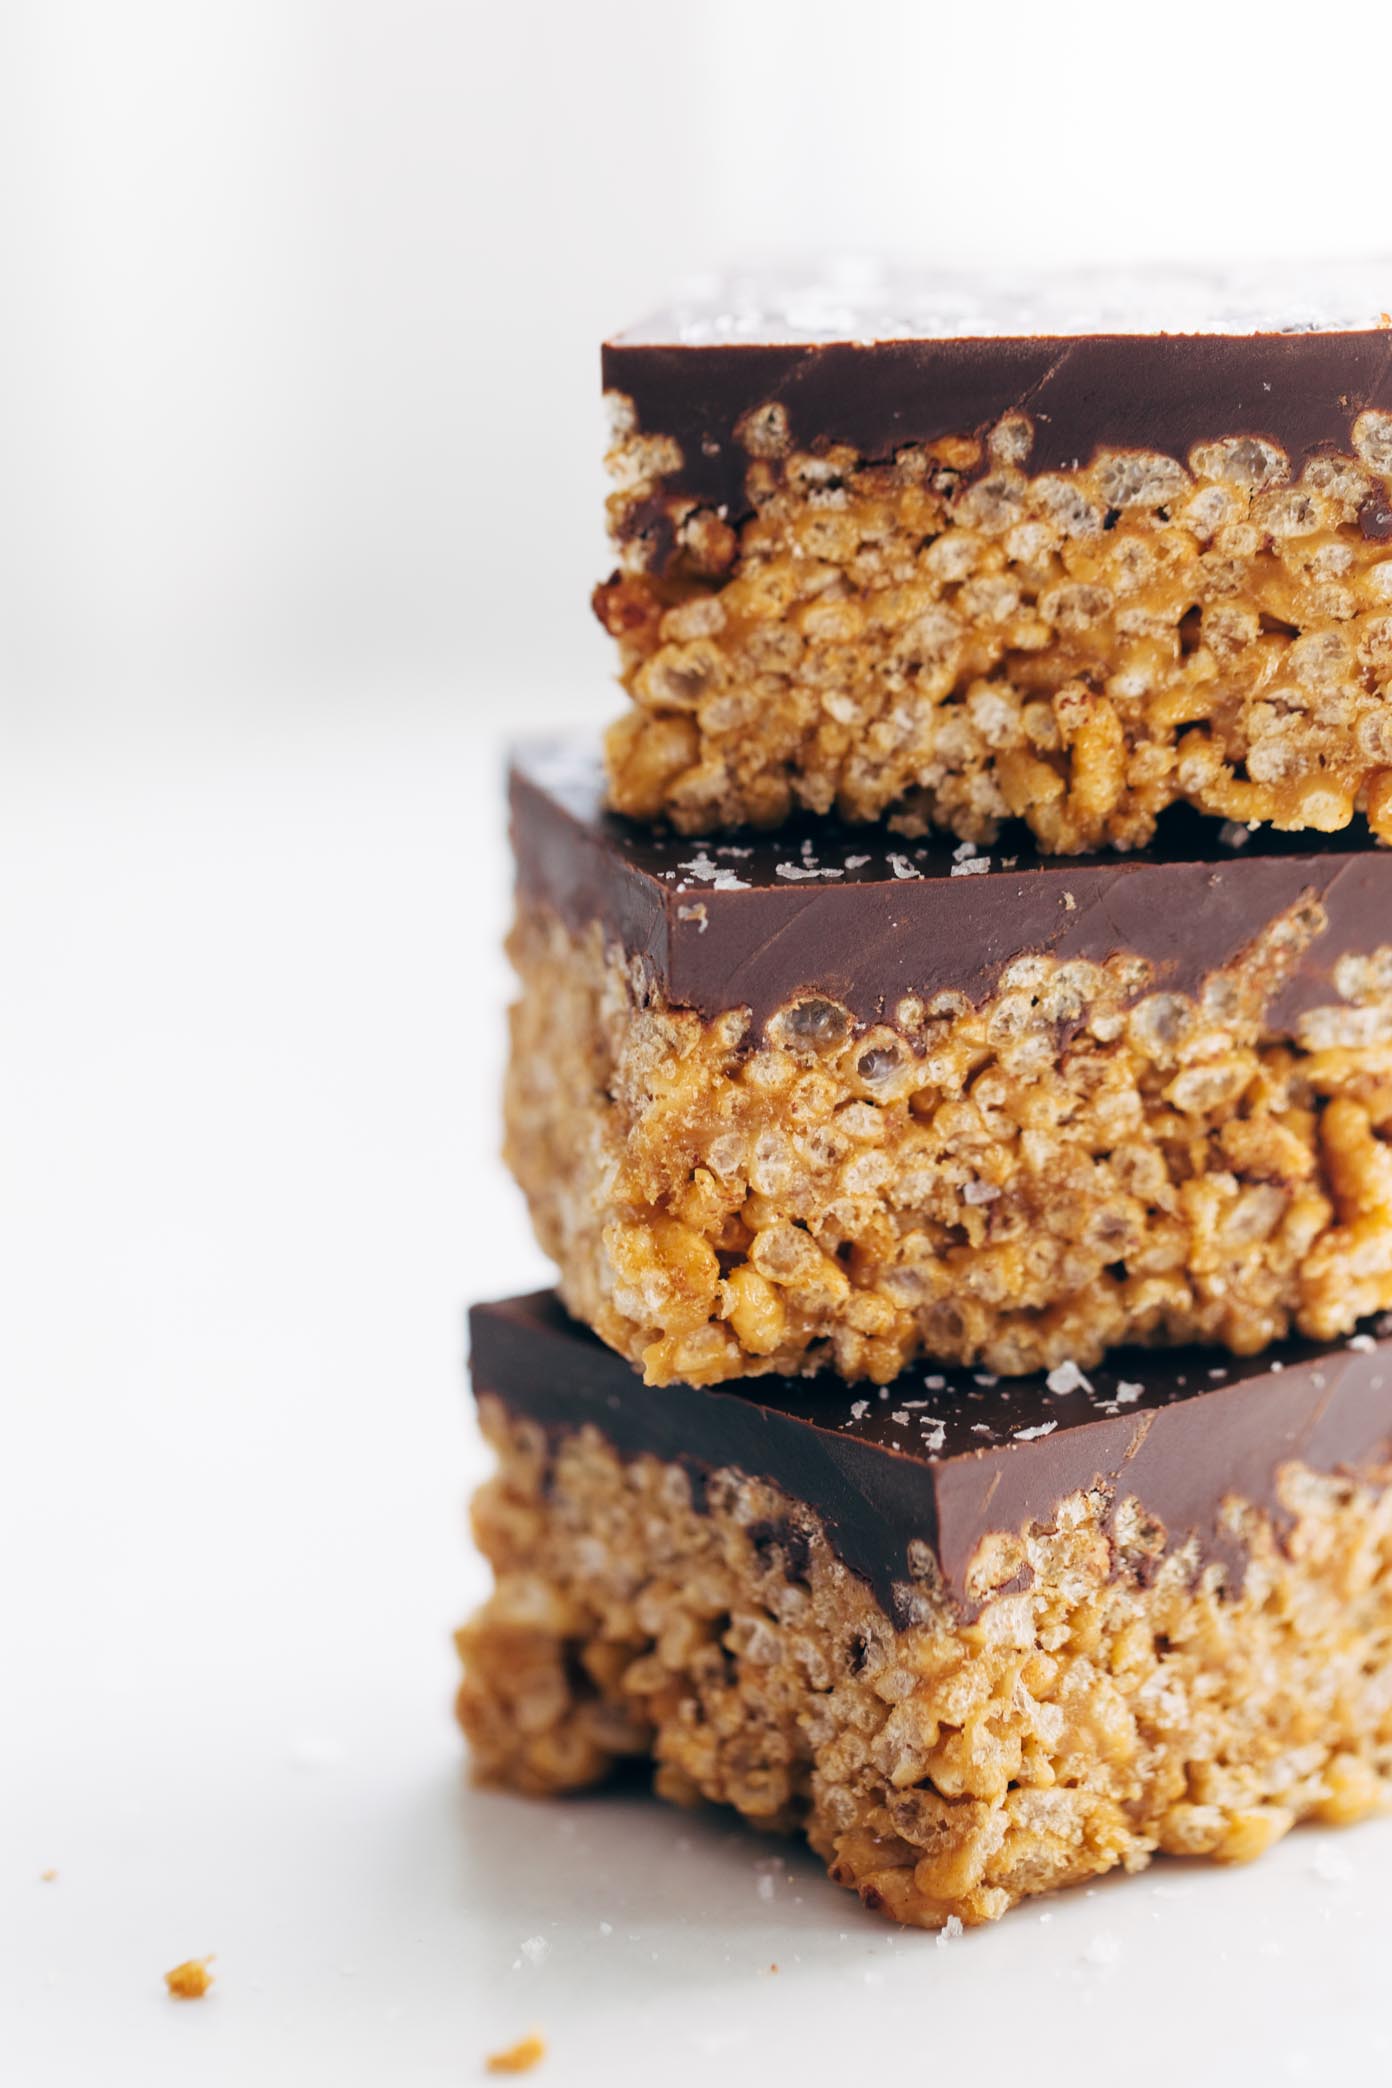 The classic chocolate-covered peanut butter rice krispie bars --> with 5 ingredients and minimal refined sugar, thanks to a few modern swaps! my go-to for road trip snacks. | pinchofyum.com” width=”600″ height=”900″ srcset=”http://hueysrestaurant.com/wp-content/uploads/2017/09/Modern-Scotcheroos-5.jpg 1392w, http://cdn.pinchofyum.com/wp-content/uploads/Modern-Scotcheroos-5-200×300.jpg 200w, http://cdn.pinchofyum.com/wp-content/uploads/Modern-Scotcheroos-5-768×1152.jpg 768w, http://cdn.pinchofyum.com/wp-content/uploads/Modern-Scotcheroos-5-600×900.jpg 600w” sizes=”(max-width: 1392px) 100vw, 1392px”></p>
<p>Sticky-sweet, lightly crispy peanut butter rice krispie mixture topped with a thick layer of melted chocolate and sprinkled with magical flakes of sea salt. That’s all, thank you and goodnight Twin Cities!</p>
<p>Friends, this is the food I was raised on. In the background of every family and school event of my childhood lies a scratched and dented 9×13 of almost-gone scotcheroos. It is simple Midwestern goodness and it should not be messed with.</p>
<p>Except, I did one thing: I messed with it. Whyyyy.</p>
<p>As an anxious person finding her way through the world, I’d say I follow all rules of all places at all times exactly ALL THE TIME, but there is always that pesky 1% of the time at which point I become a rule-breaking, delinquent, rogue recipe “creative.” It is not wise to give me your classic recipes. I am not to be trusted with such precious, unbreakable things. I pinky promise I will take what is written and go off the rails with it.</p>
<p><img class=